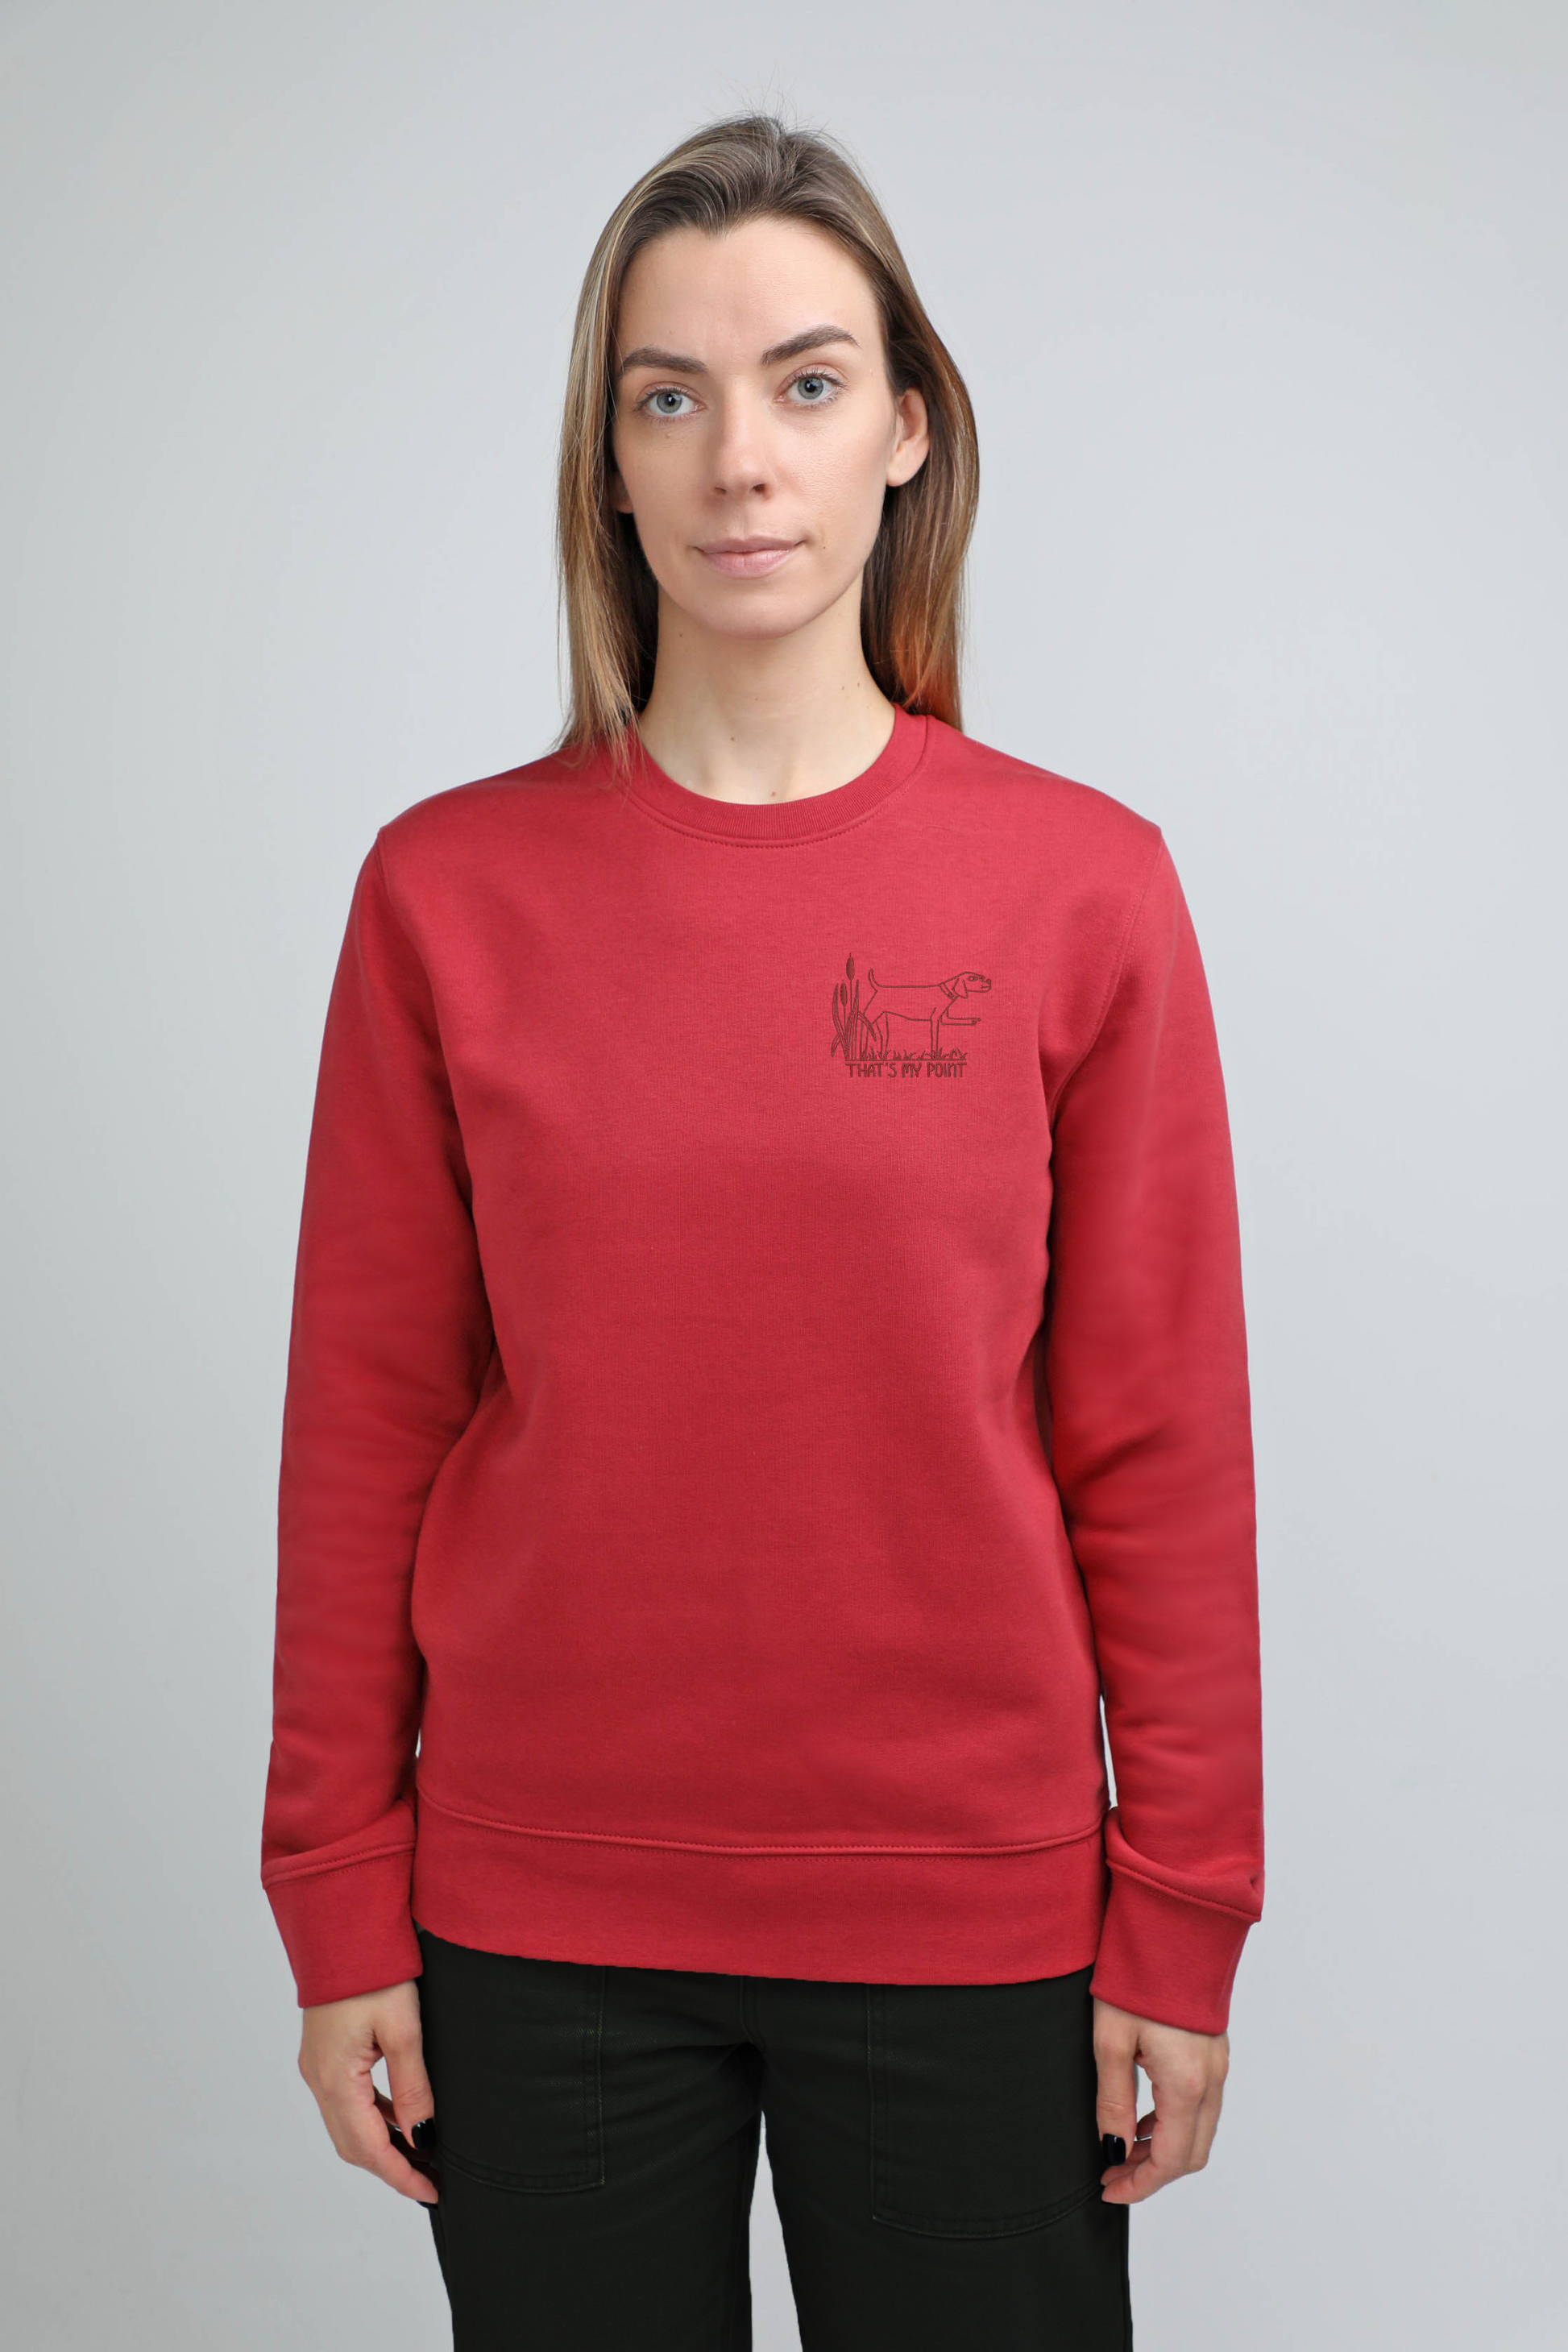 S available only | That's my point | Crew neck sweatshirt with embroidered dog. Regular fit | Unisex by My Wild Other